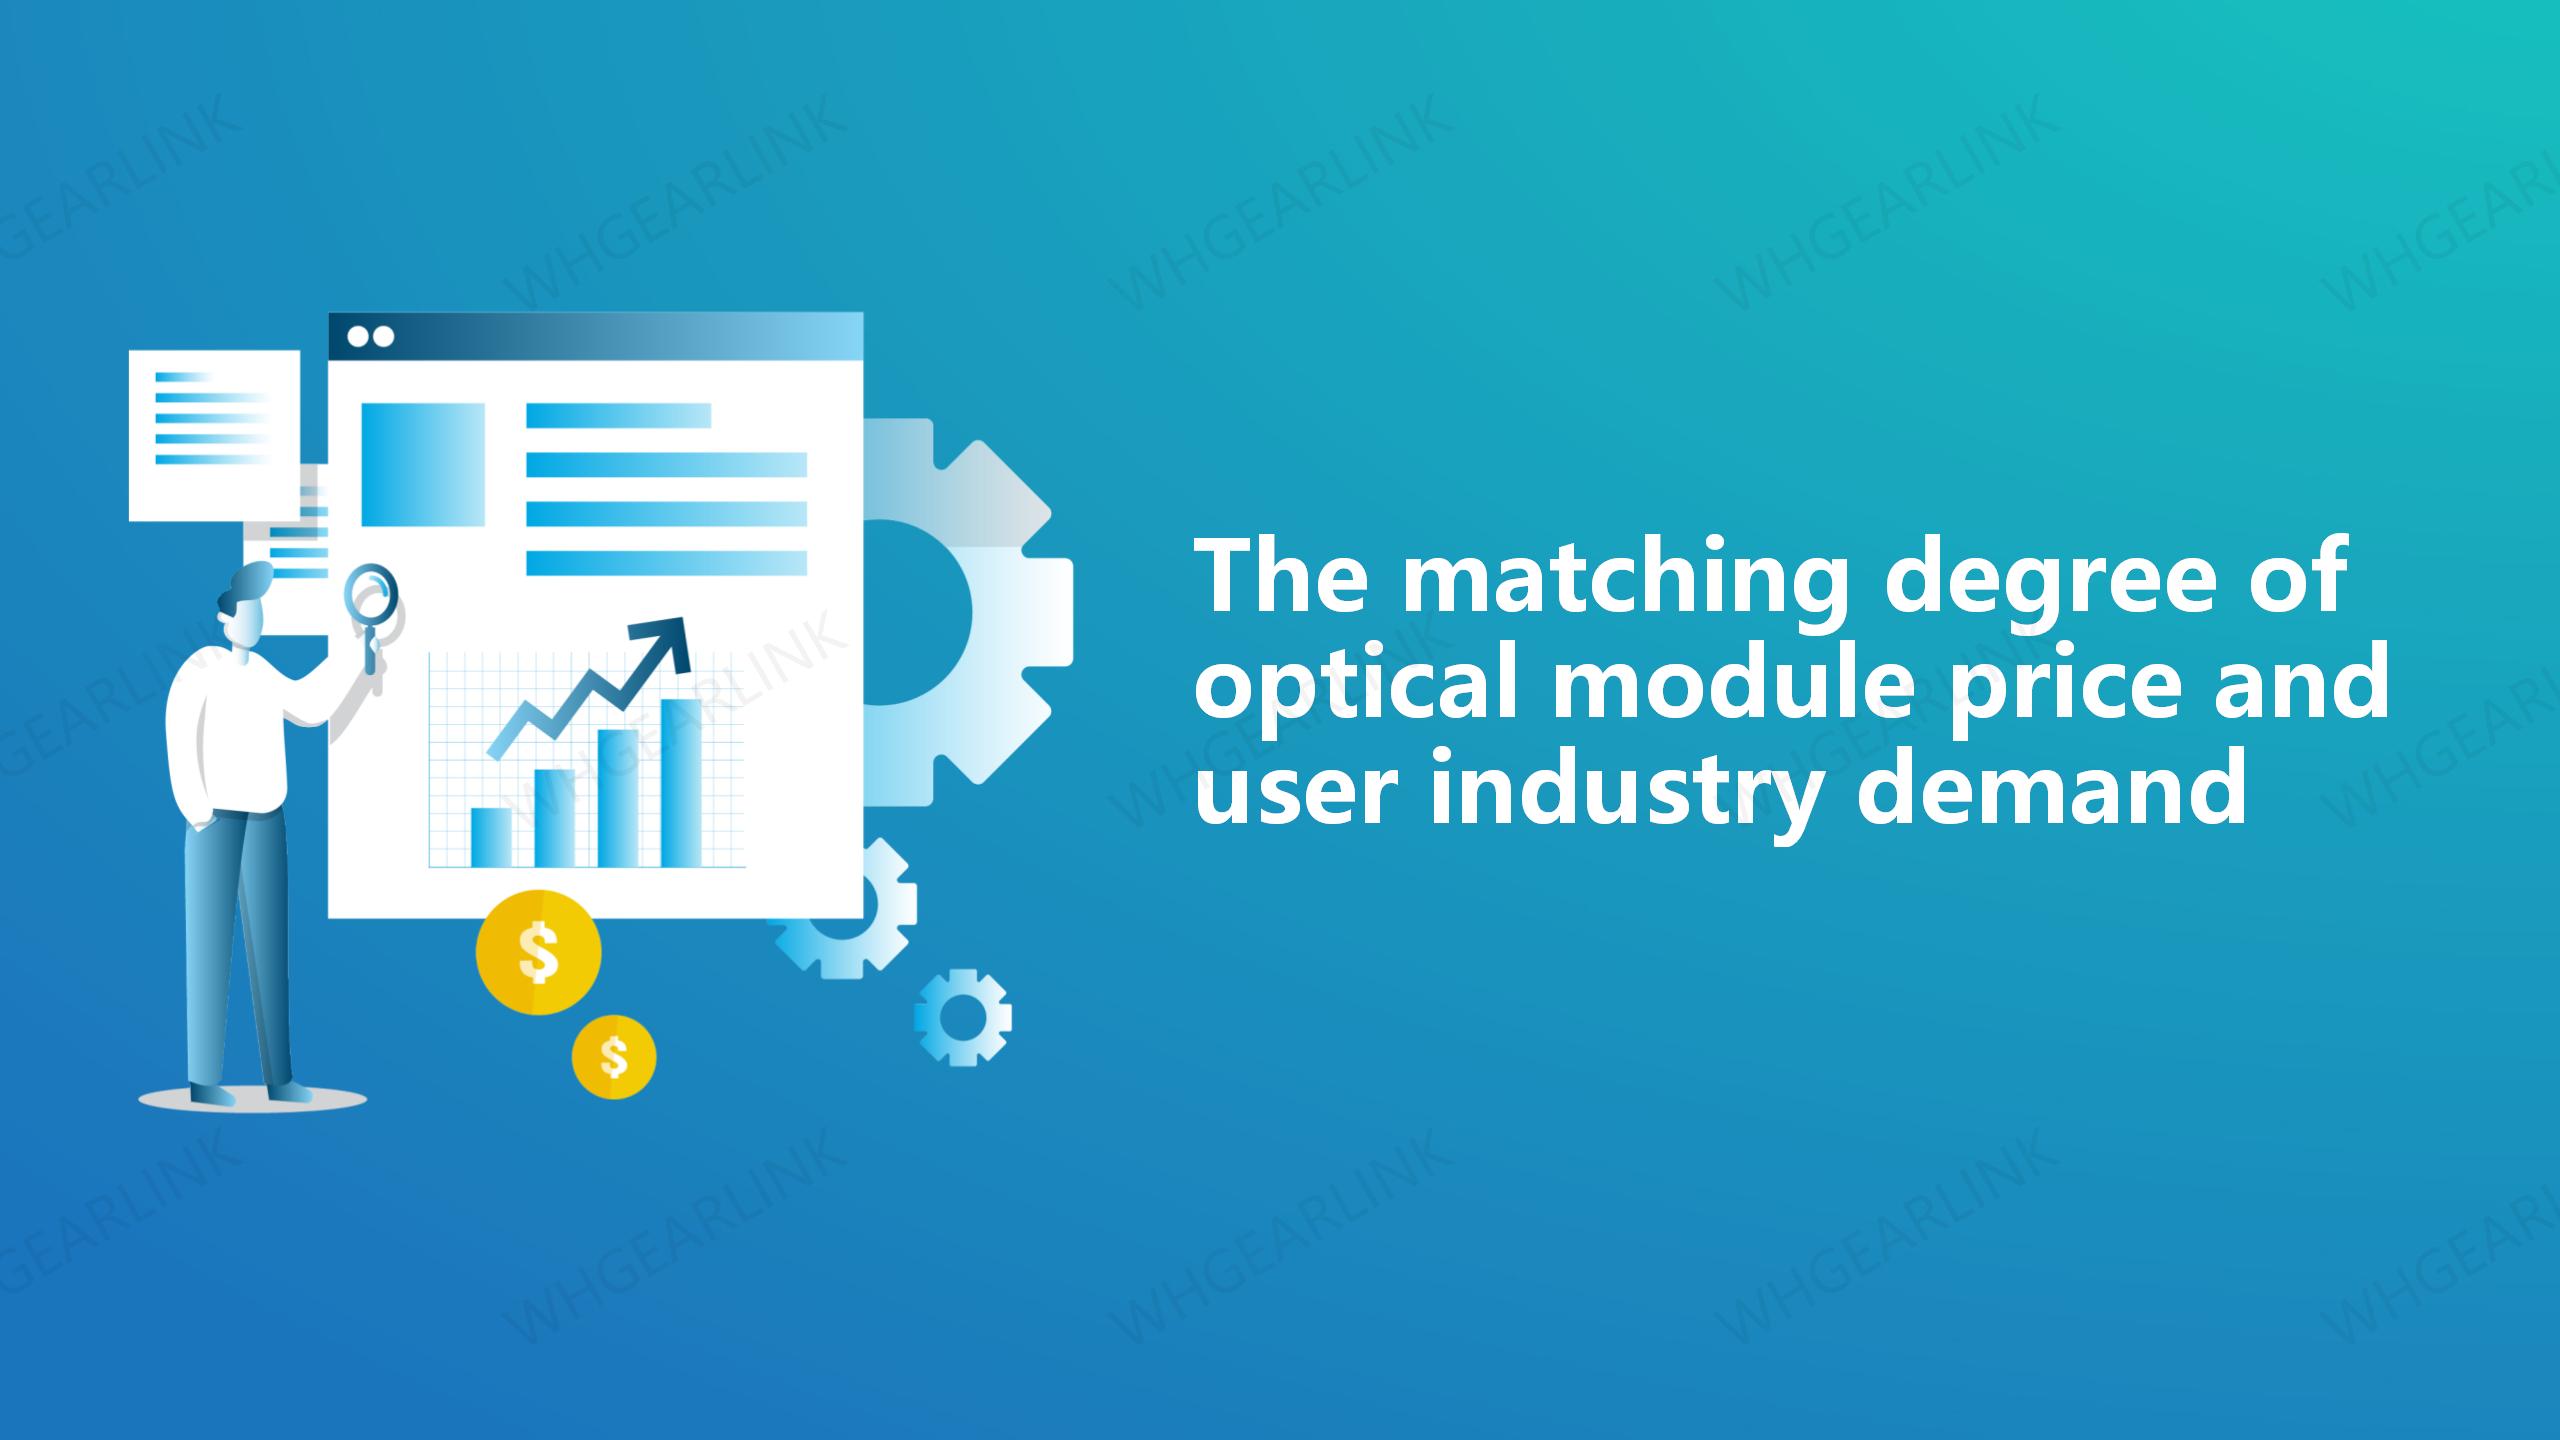 The matching degree of optical module price and user industry demand